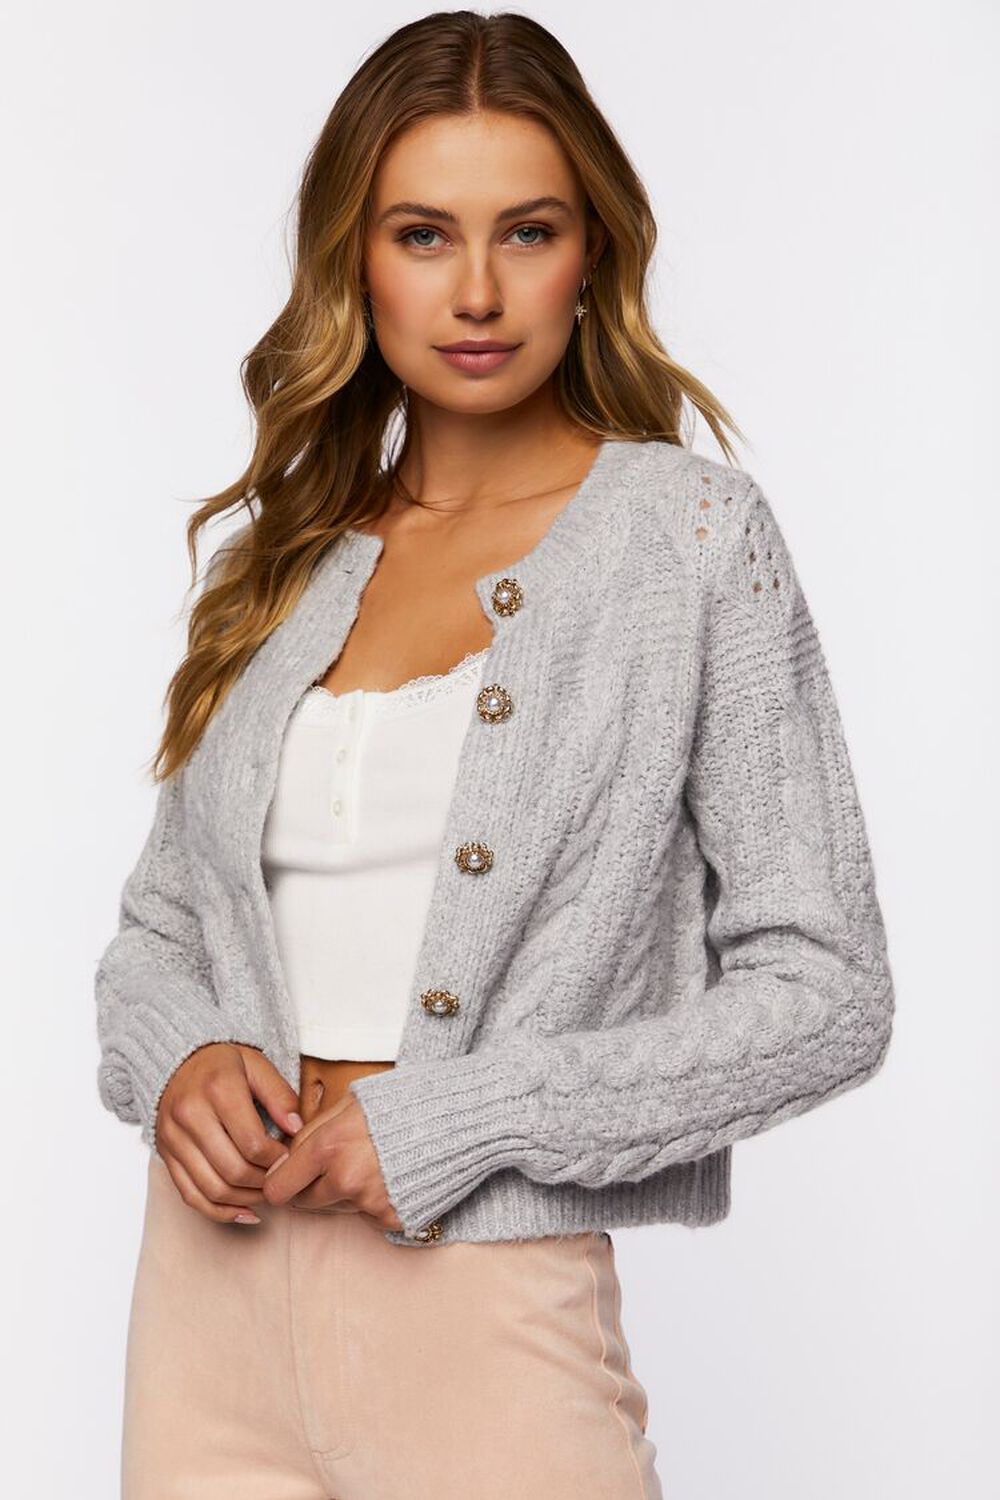 HEATHER GREY Faux Pearl-Button Cardigan Sweater, image 1